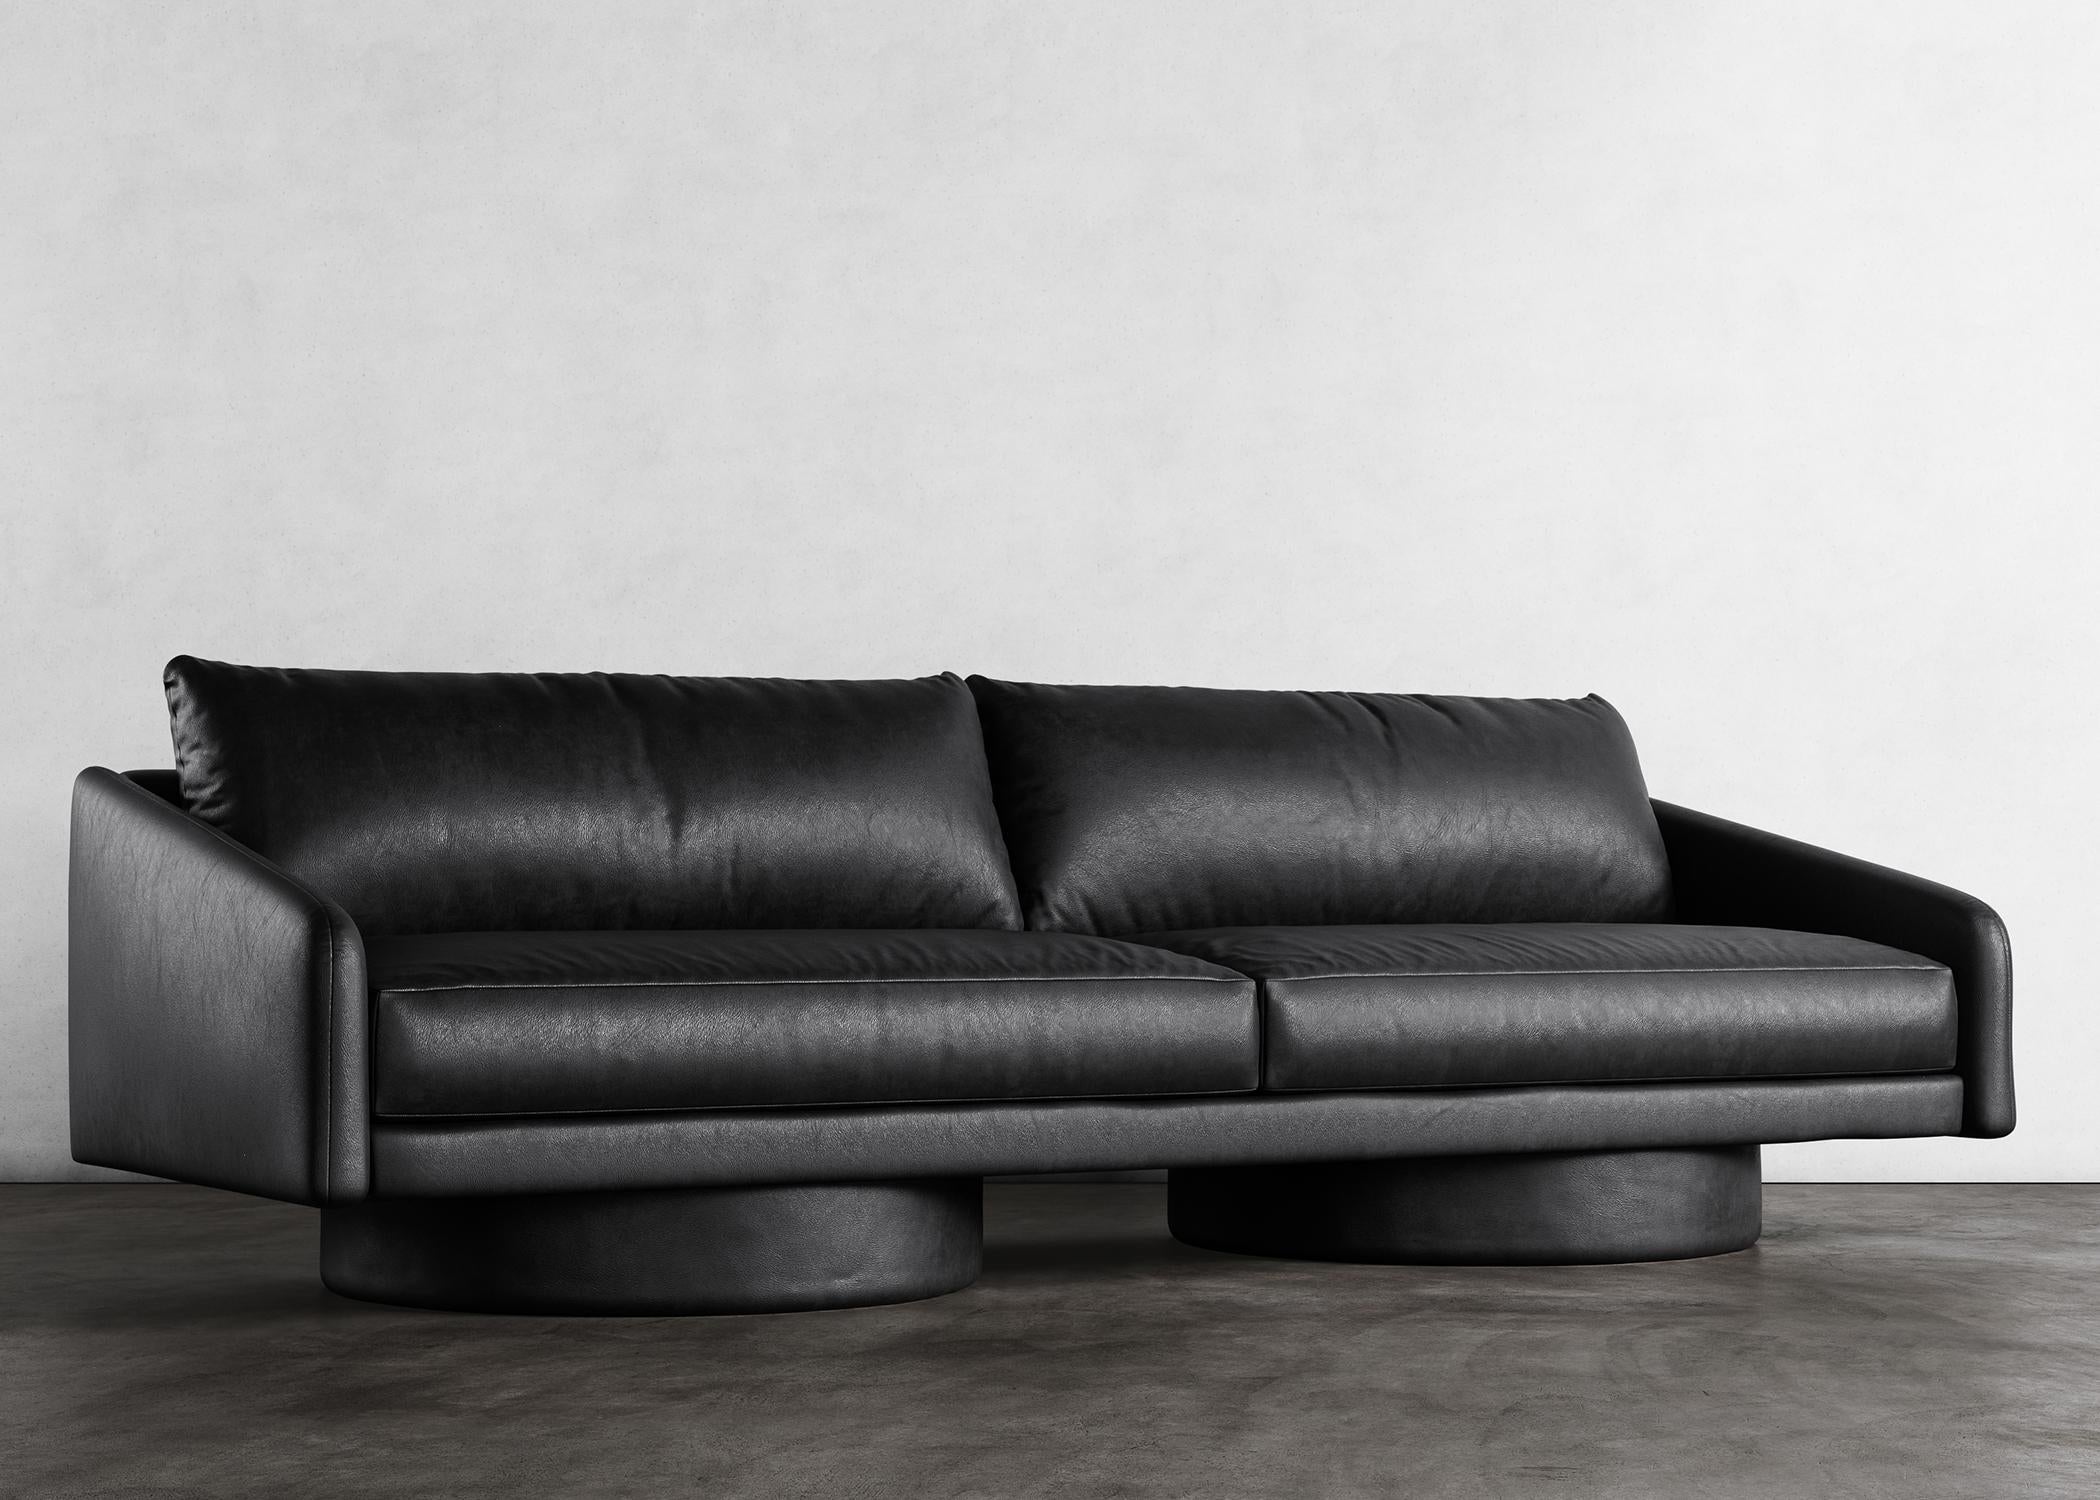 SURGE SOFA - Modern Sofa in Black Faux Lambskin

The Surge Sofa in black faux lambskin is a luxurious and stylish piece of furniture that is perfect for any modern living room. This sofa features a sleek design with clean lines and a minimalist